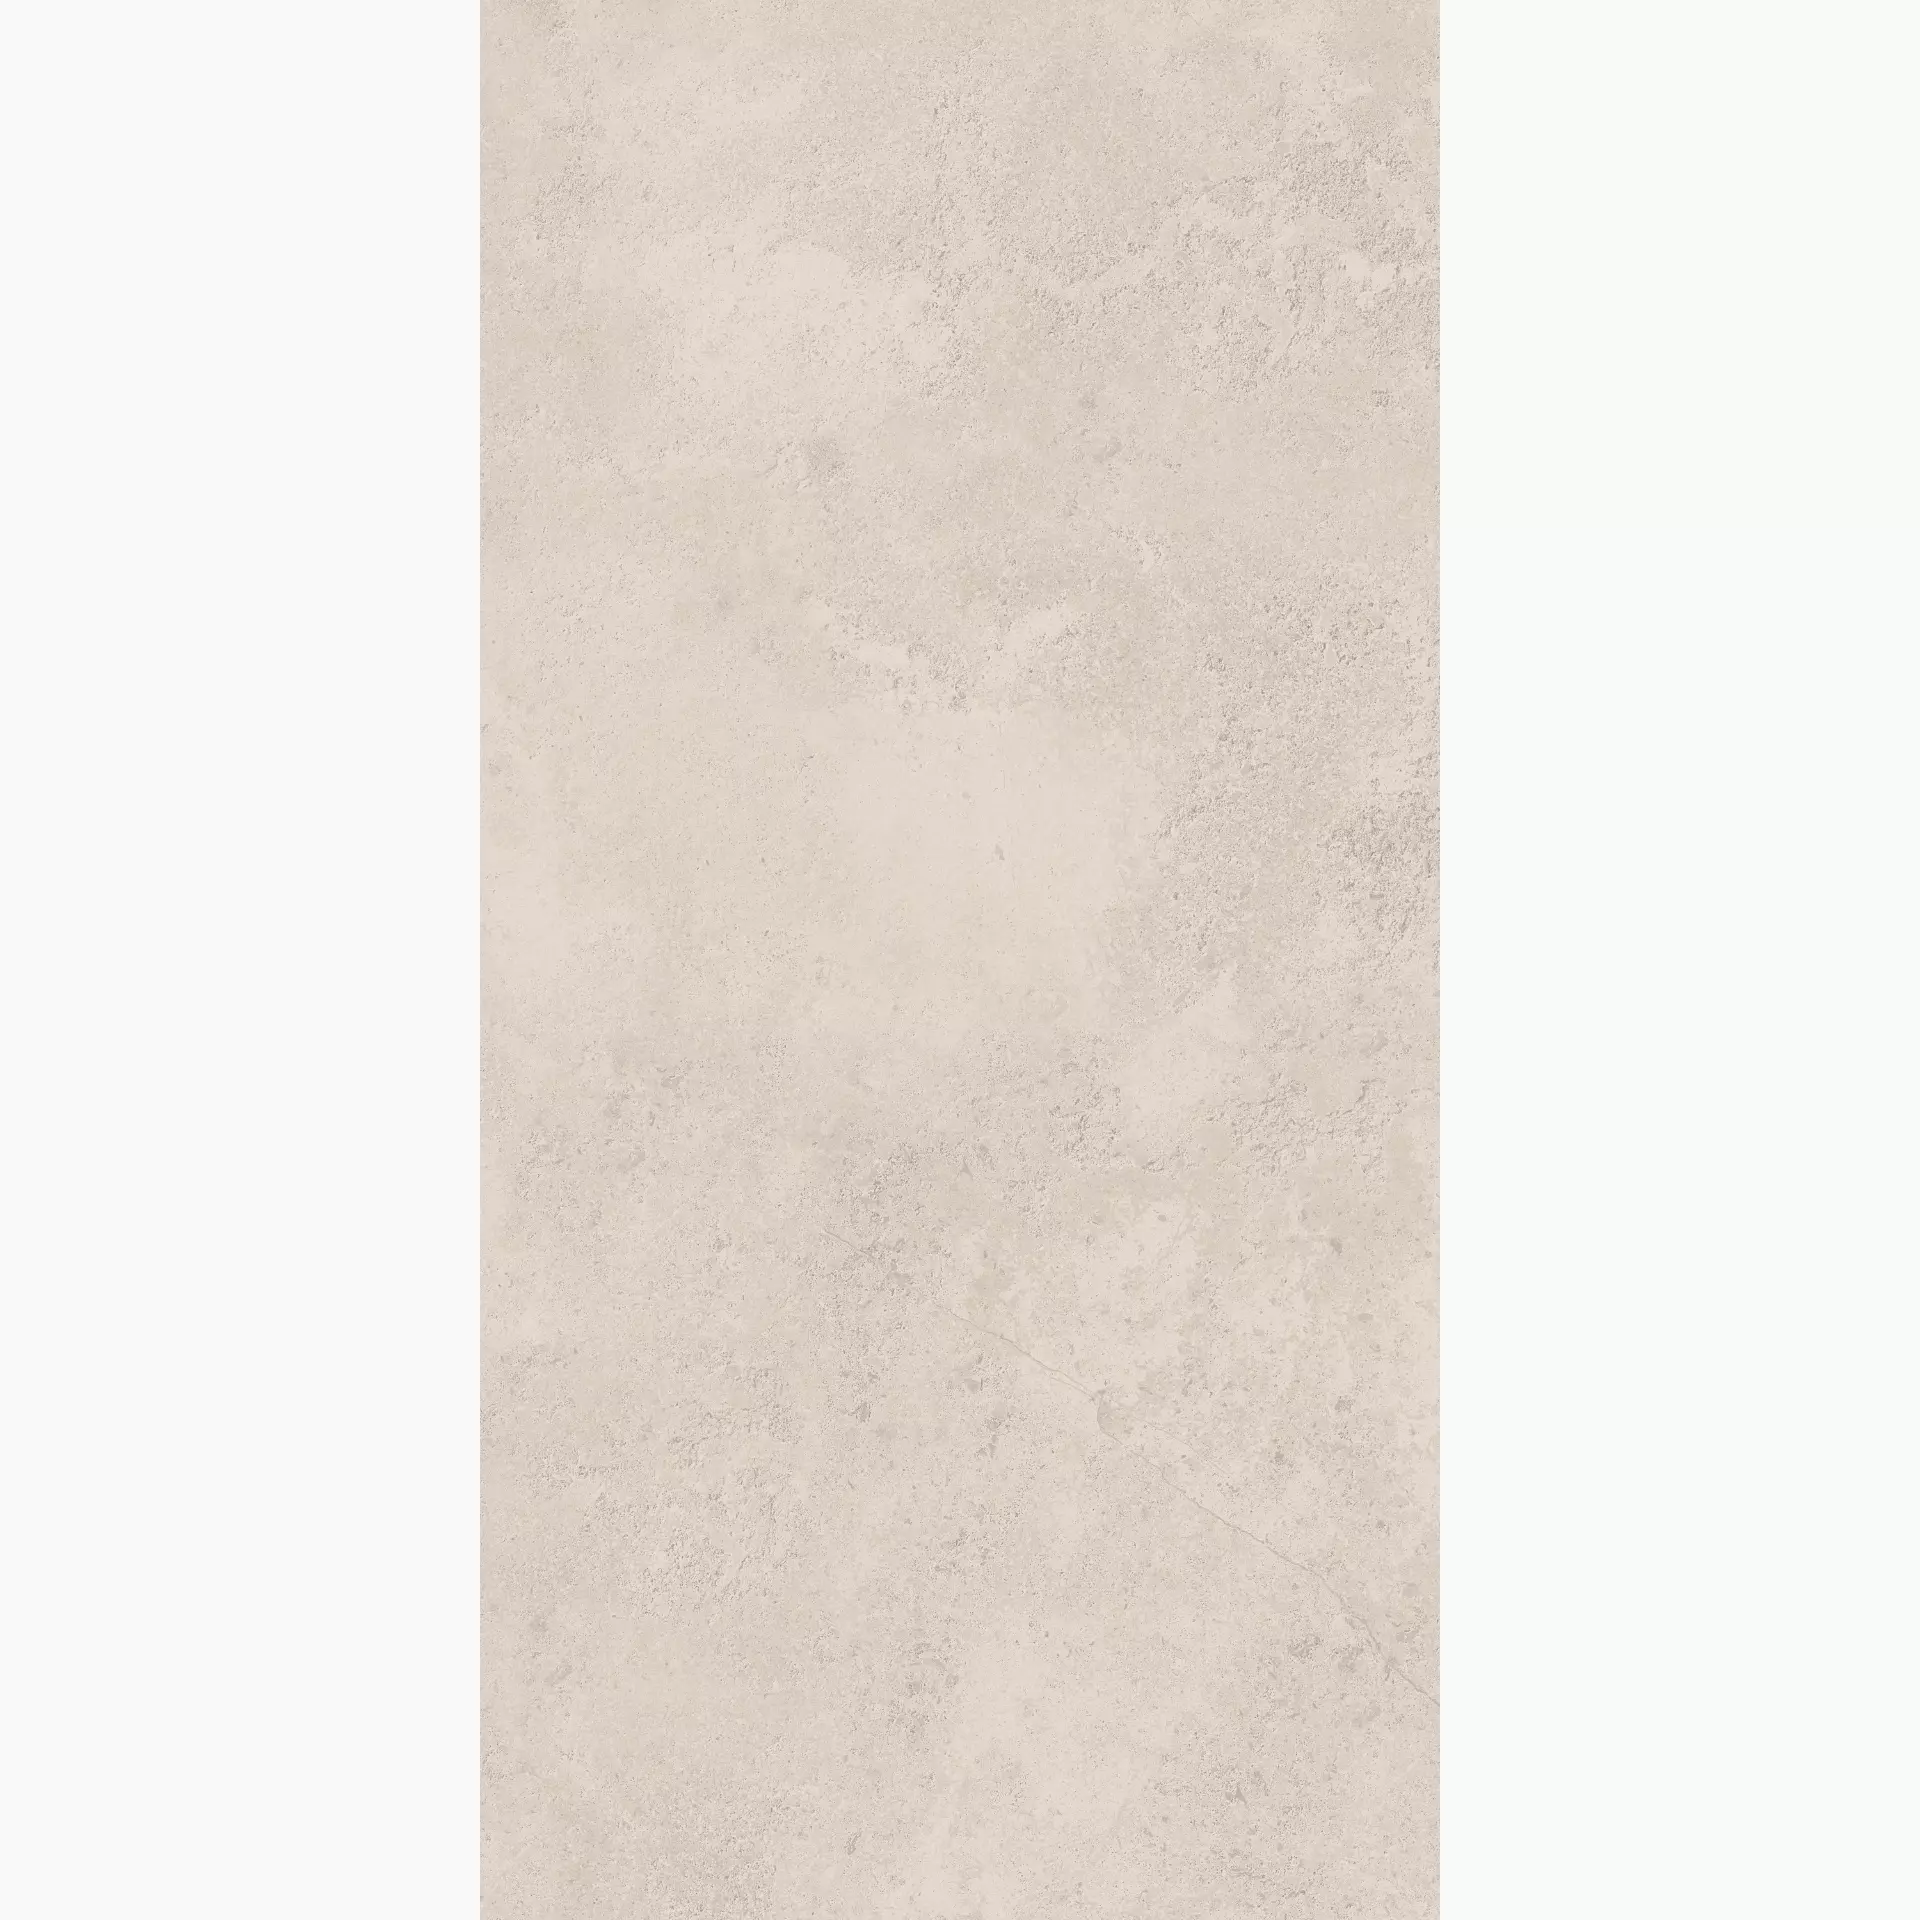 Supergres French Mood Chalon Naturale – Matt FMH6 60x120cm rectified 9mm